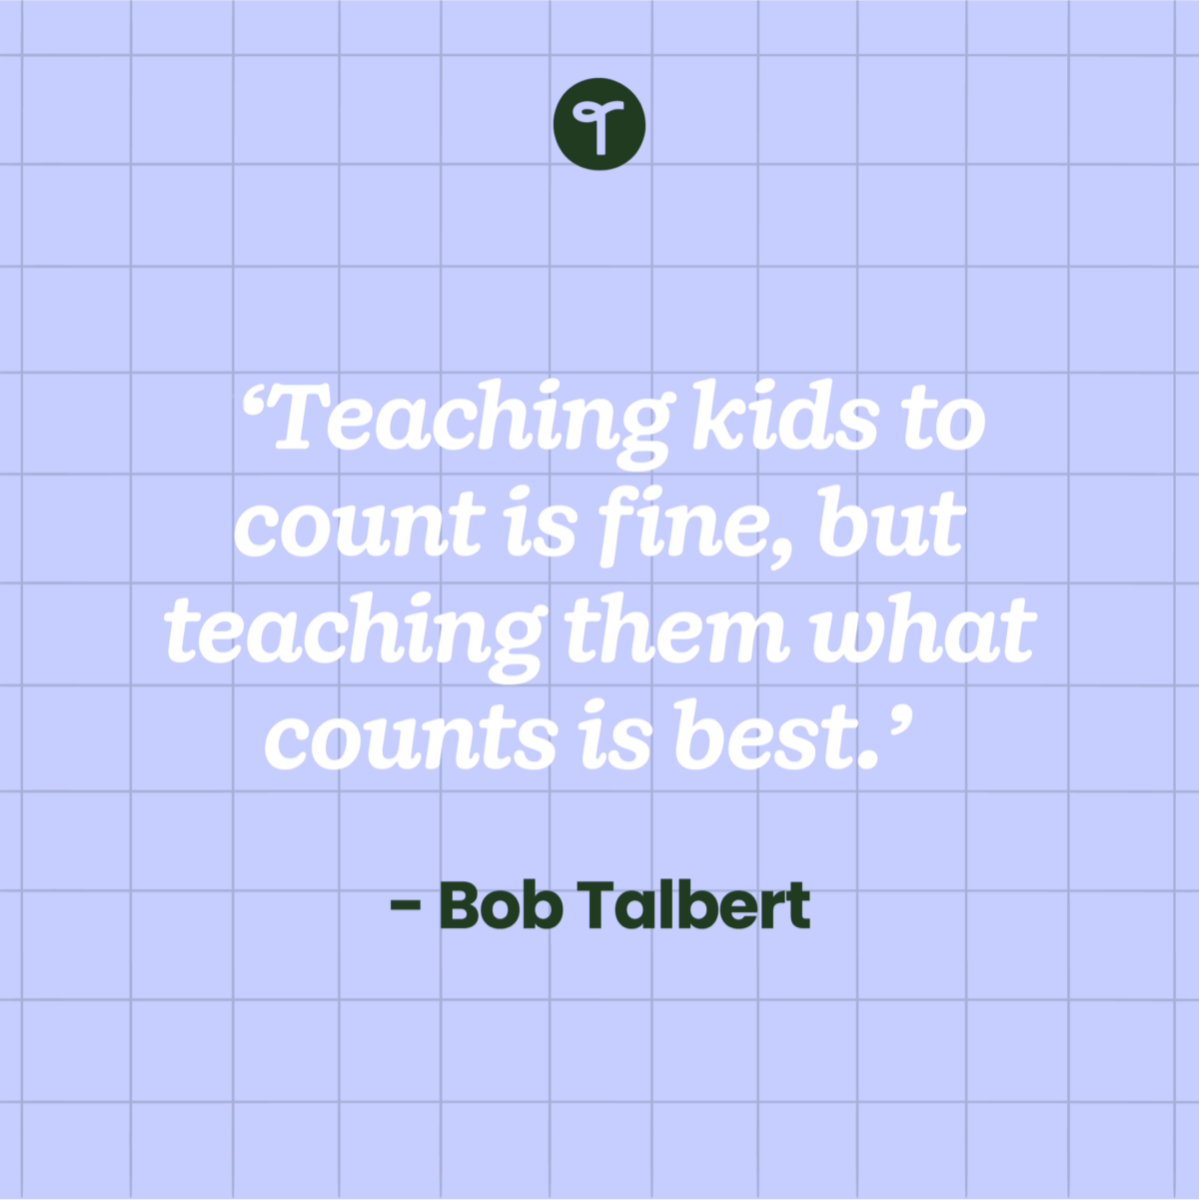 Teacher quote 'Teaching kids to count is fine, but teaching kids what counts is best.' — Bob Talbert on a purple background